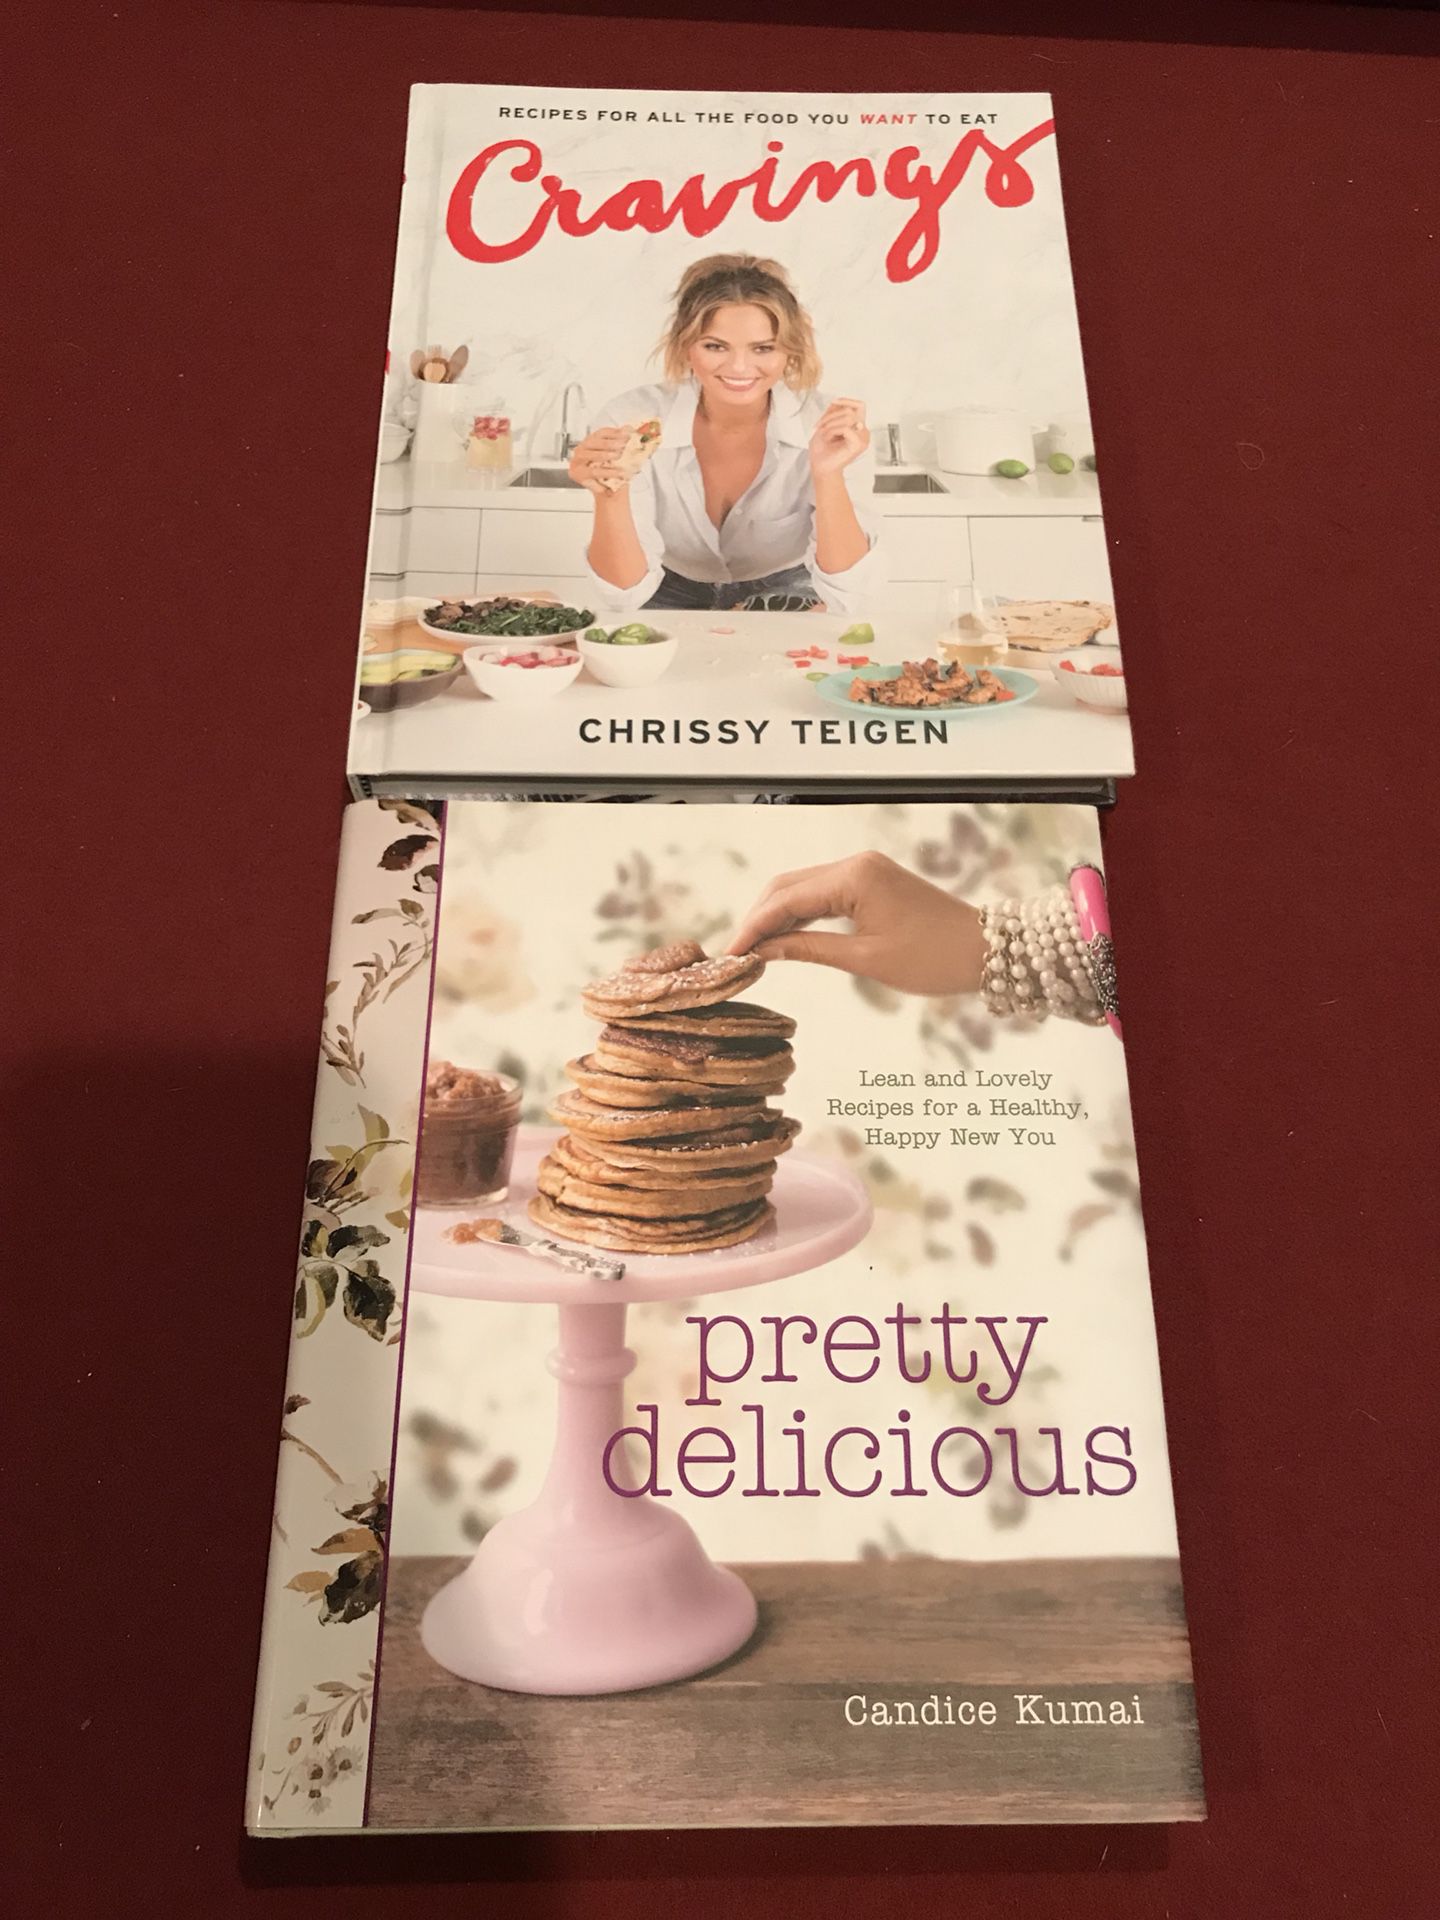 Two cook books